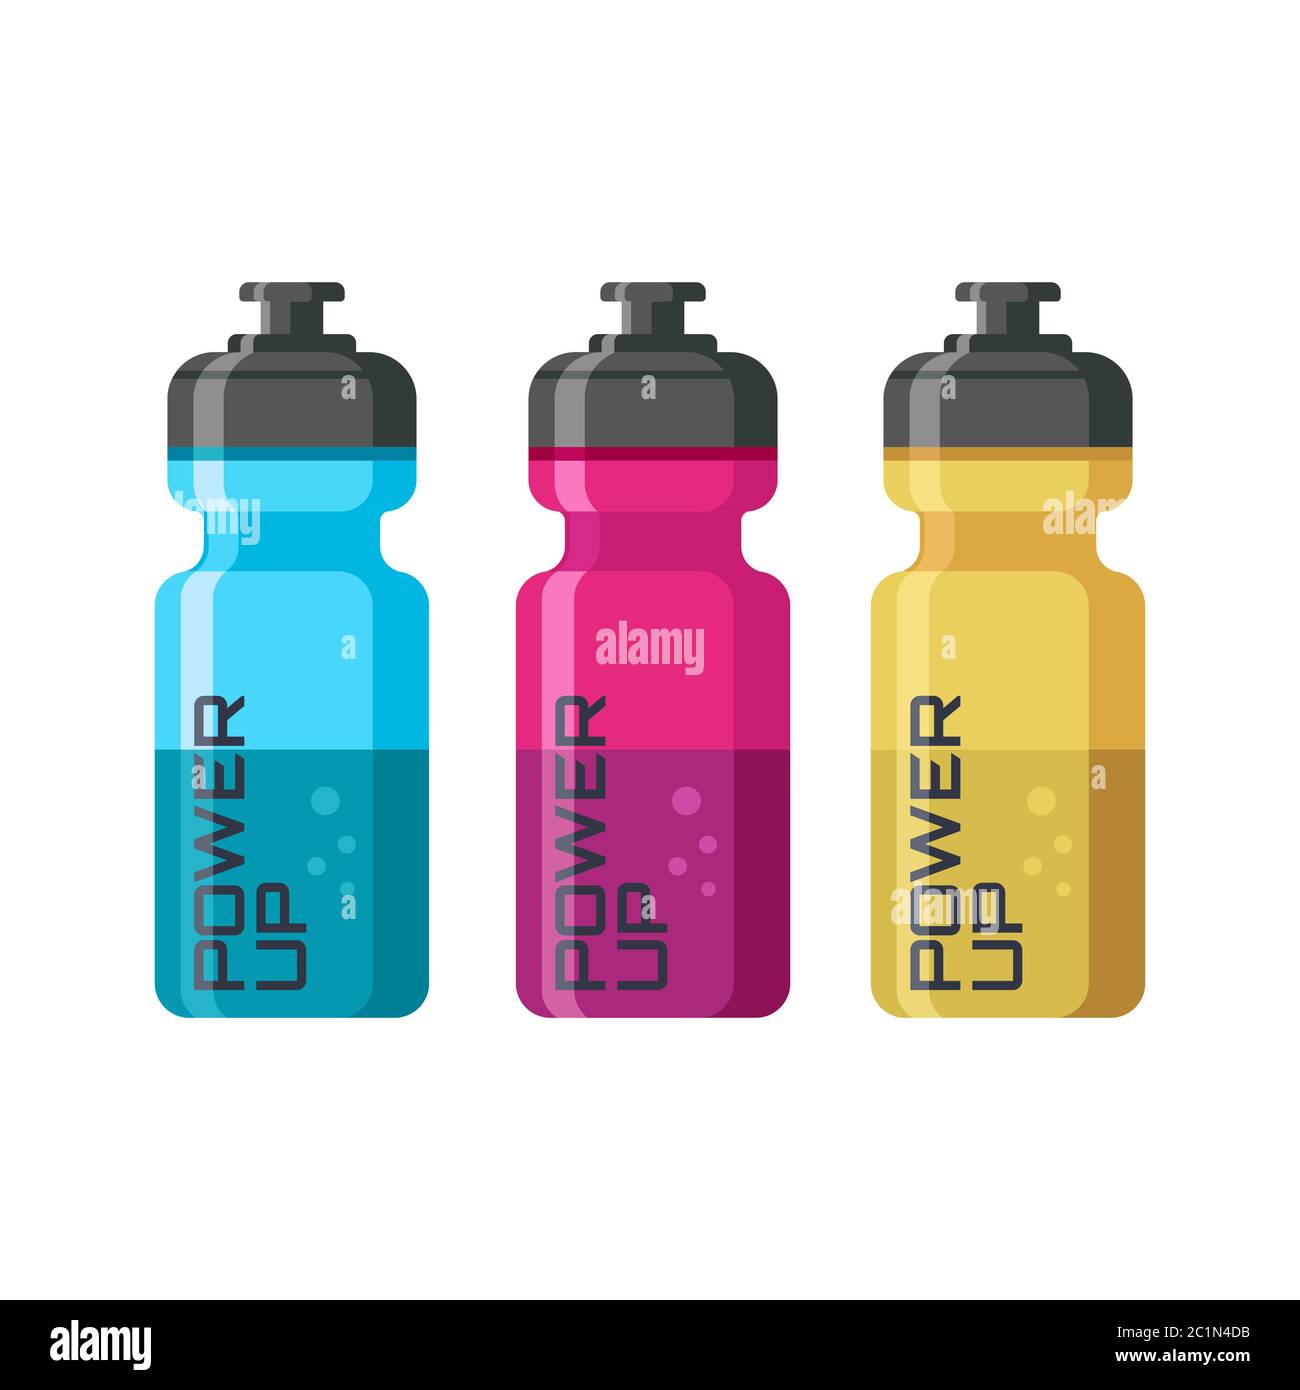 design concept for energy drink bottles for sports activities. Professional product design for model examples of sports bottle packaging Stock Vector